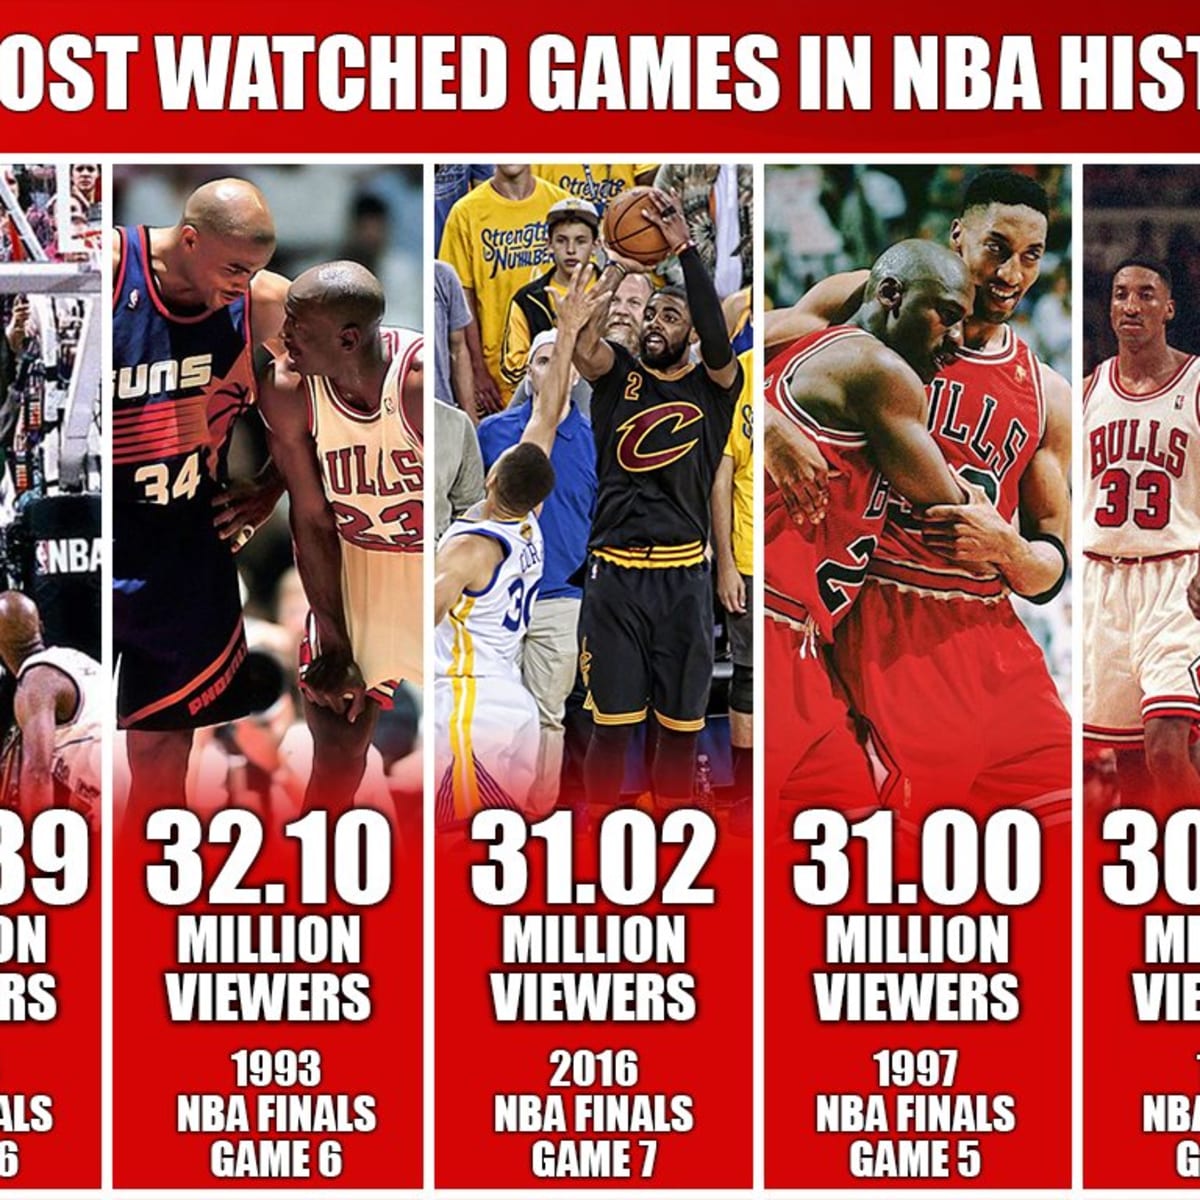 The best NBA Finals games of all time